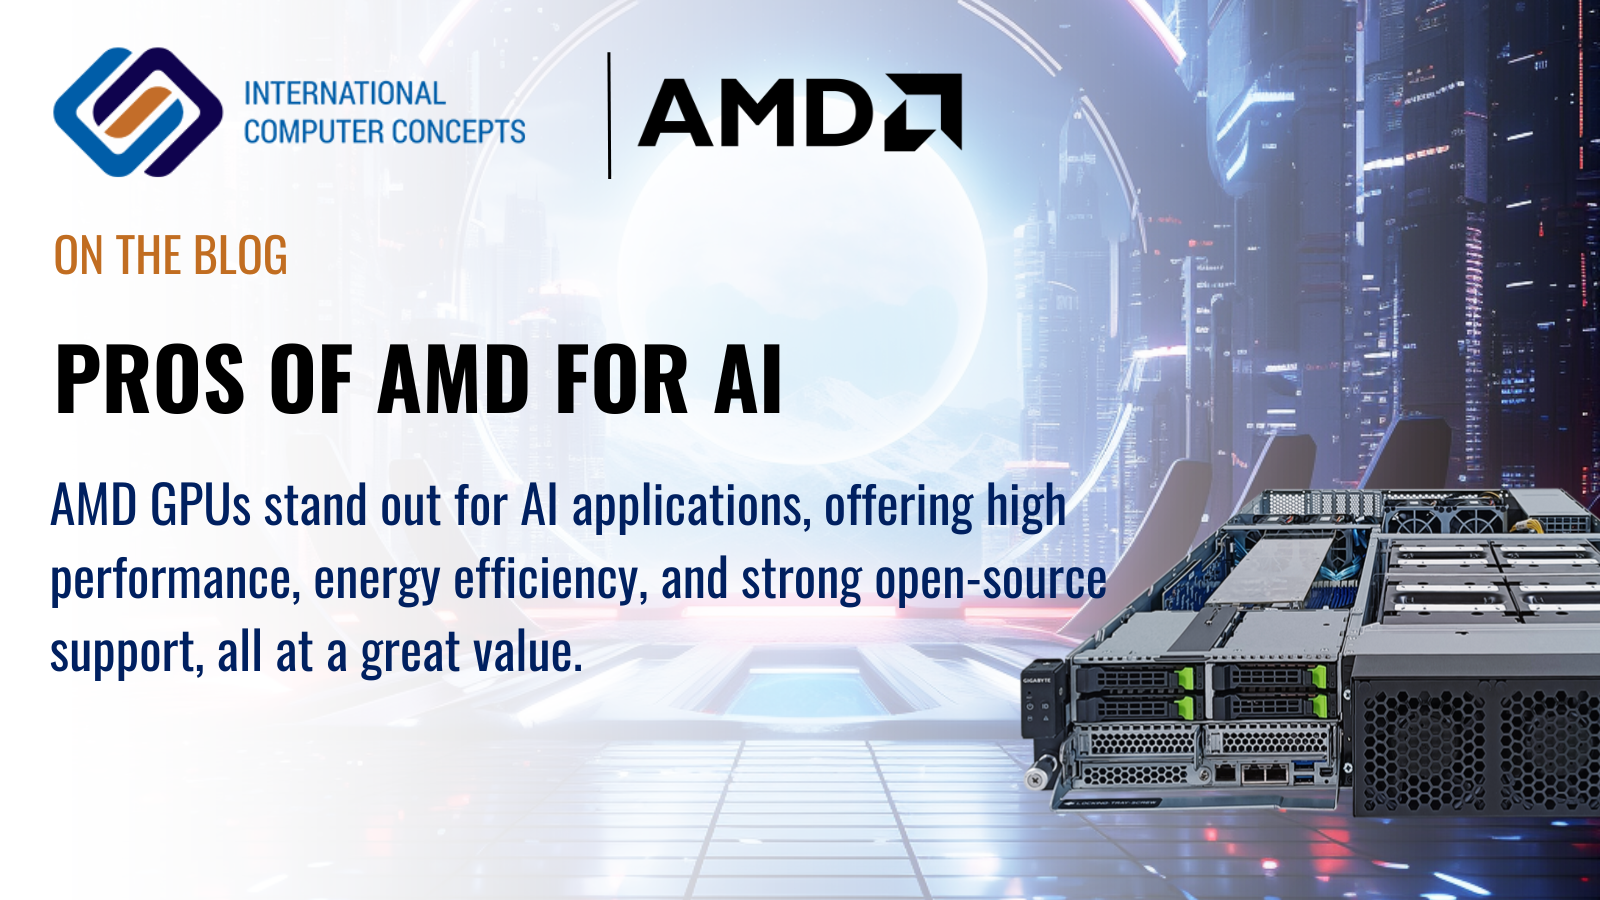 Pros of AMD for AI